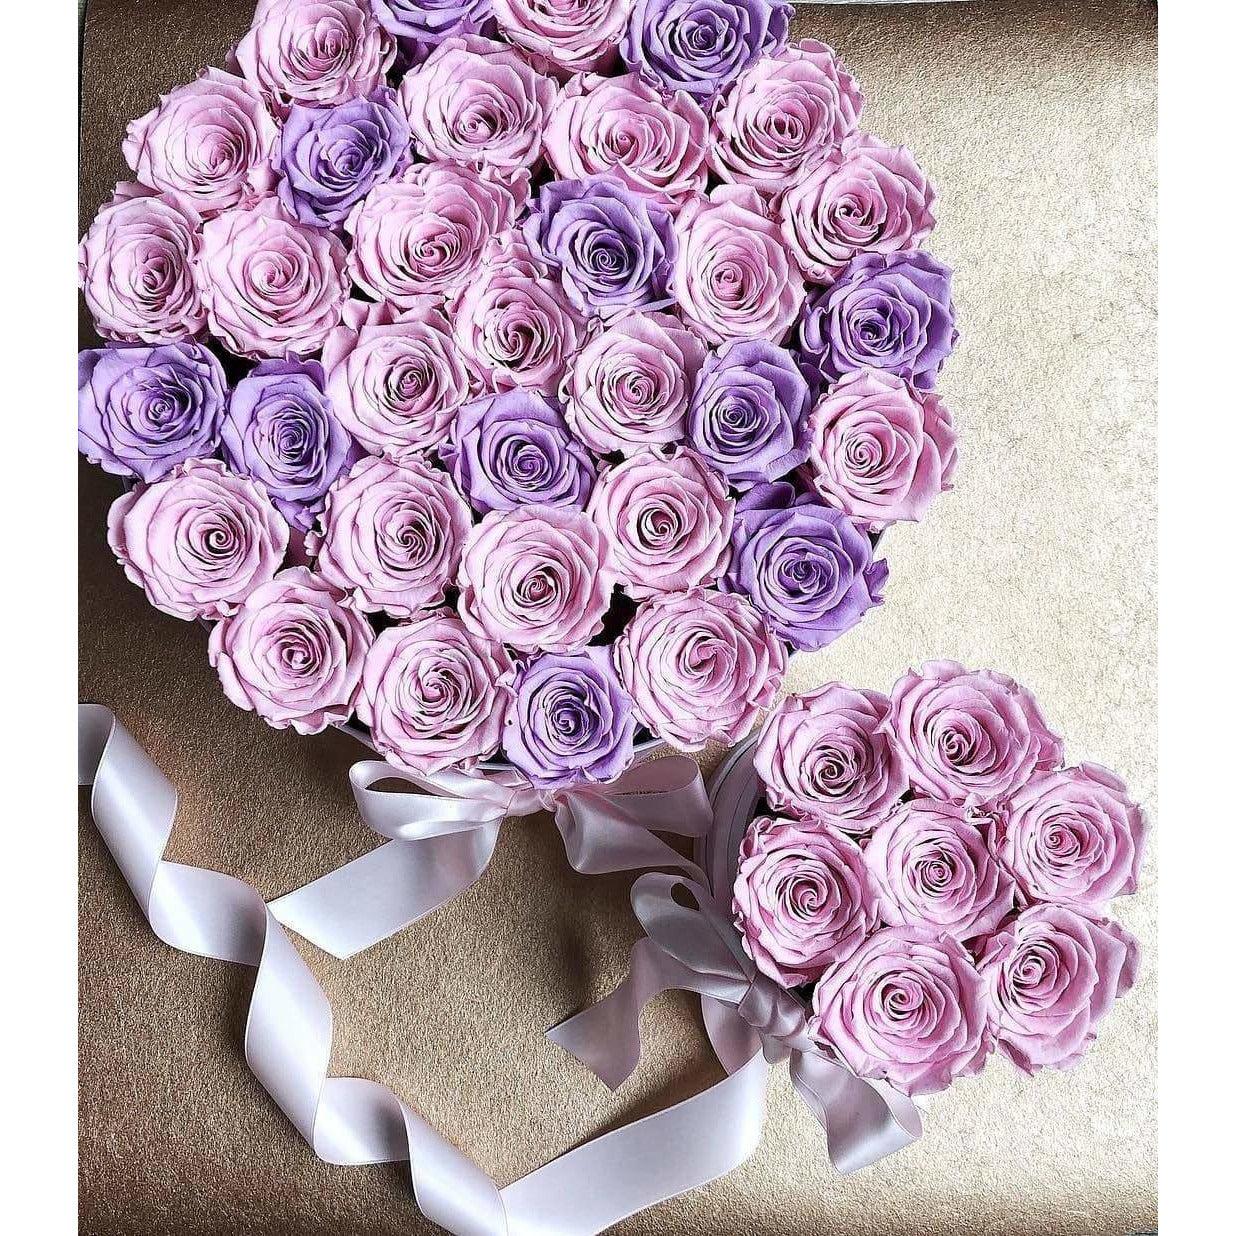 Pink & Lavender Roses That Last A Year - Deluxe Rose Box